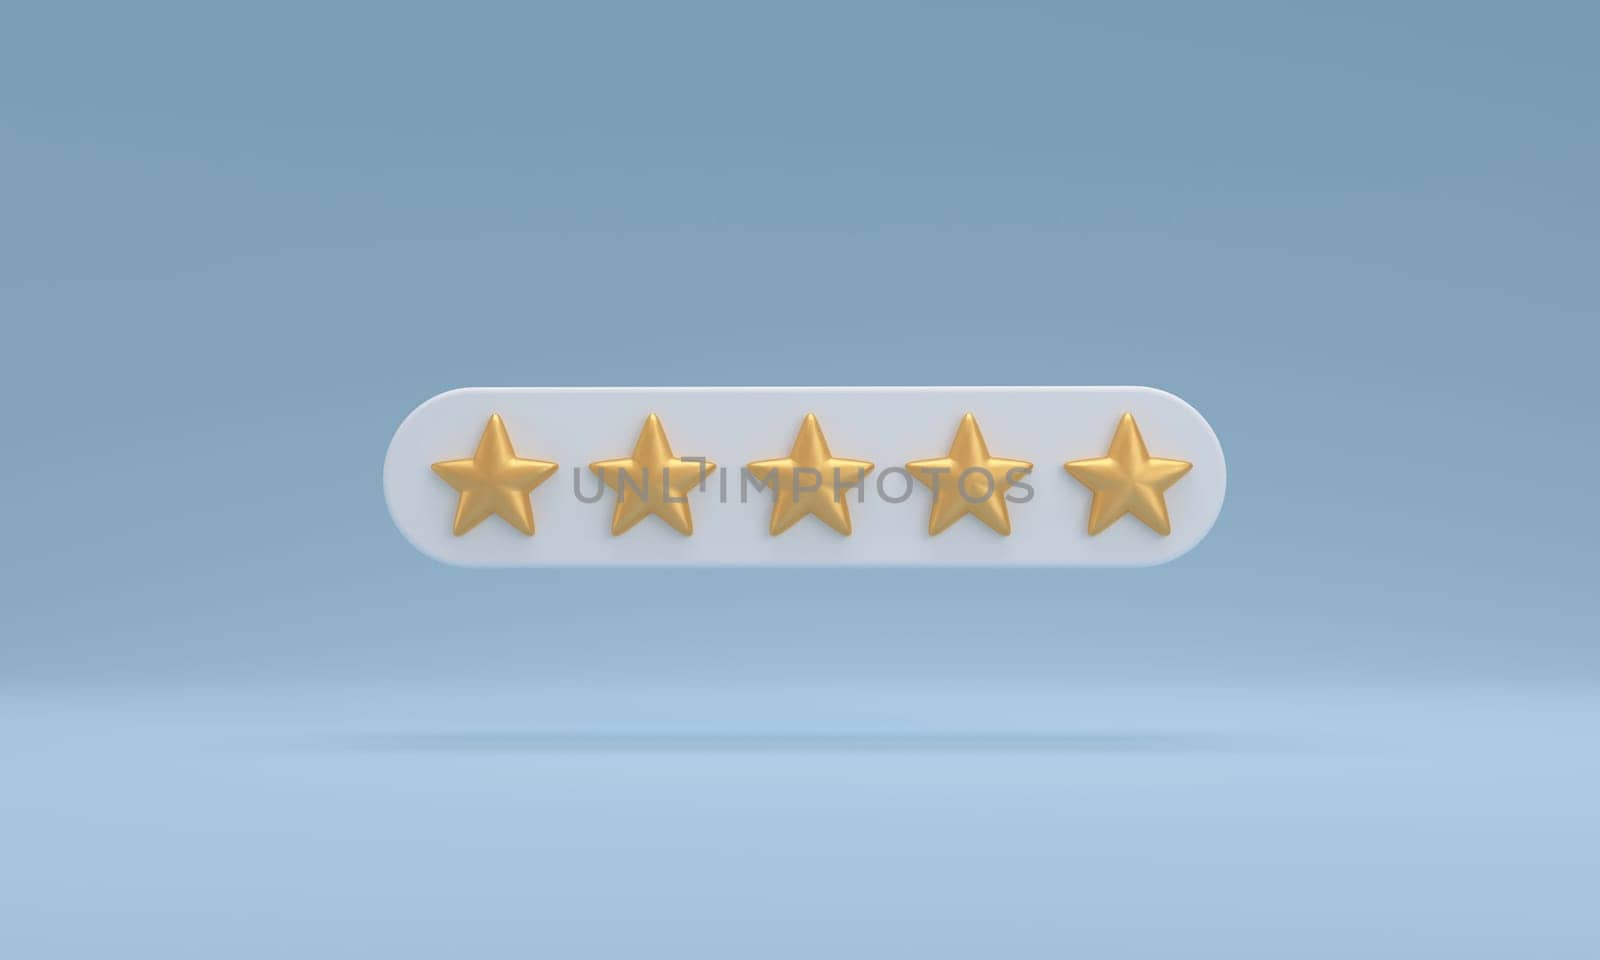 Bubble rating five golden stars for best excellent services rating for satisfaction. Customer rating feedback concept. 3d rendering